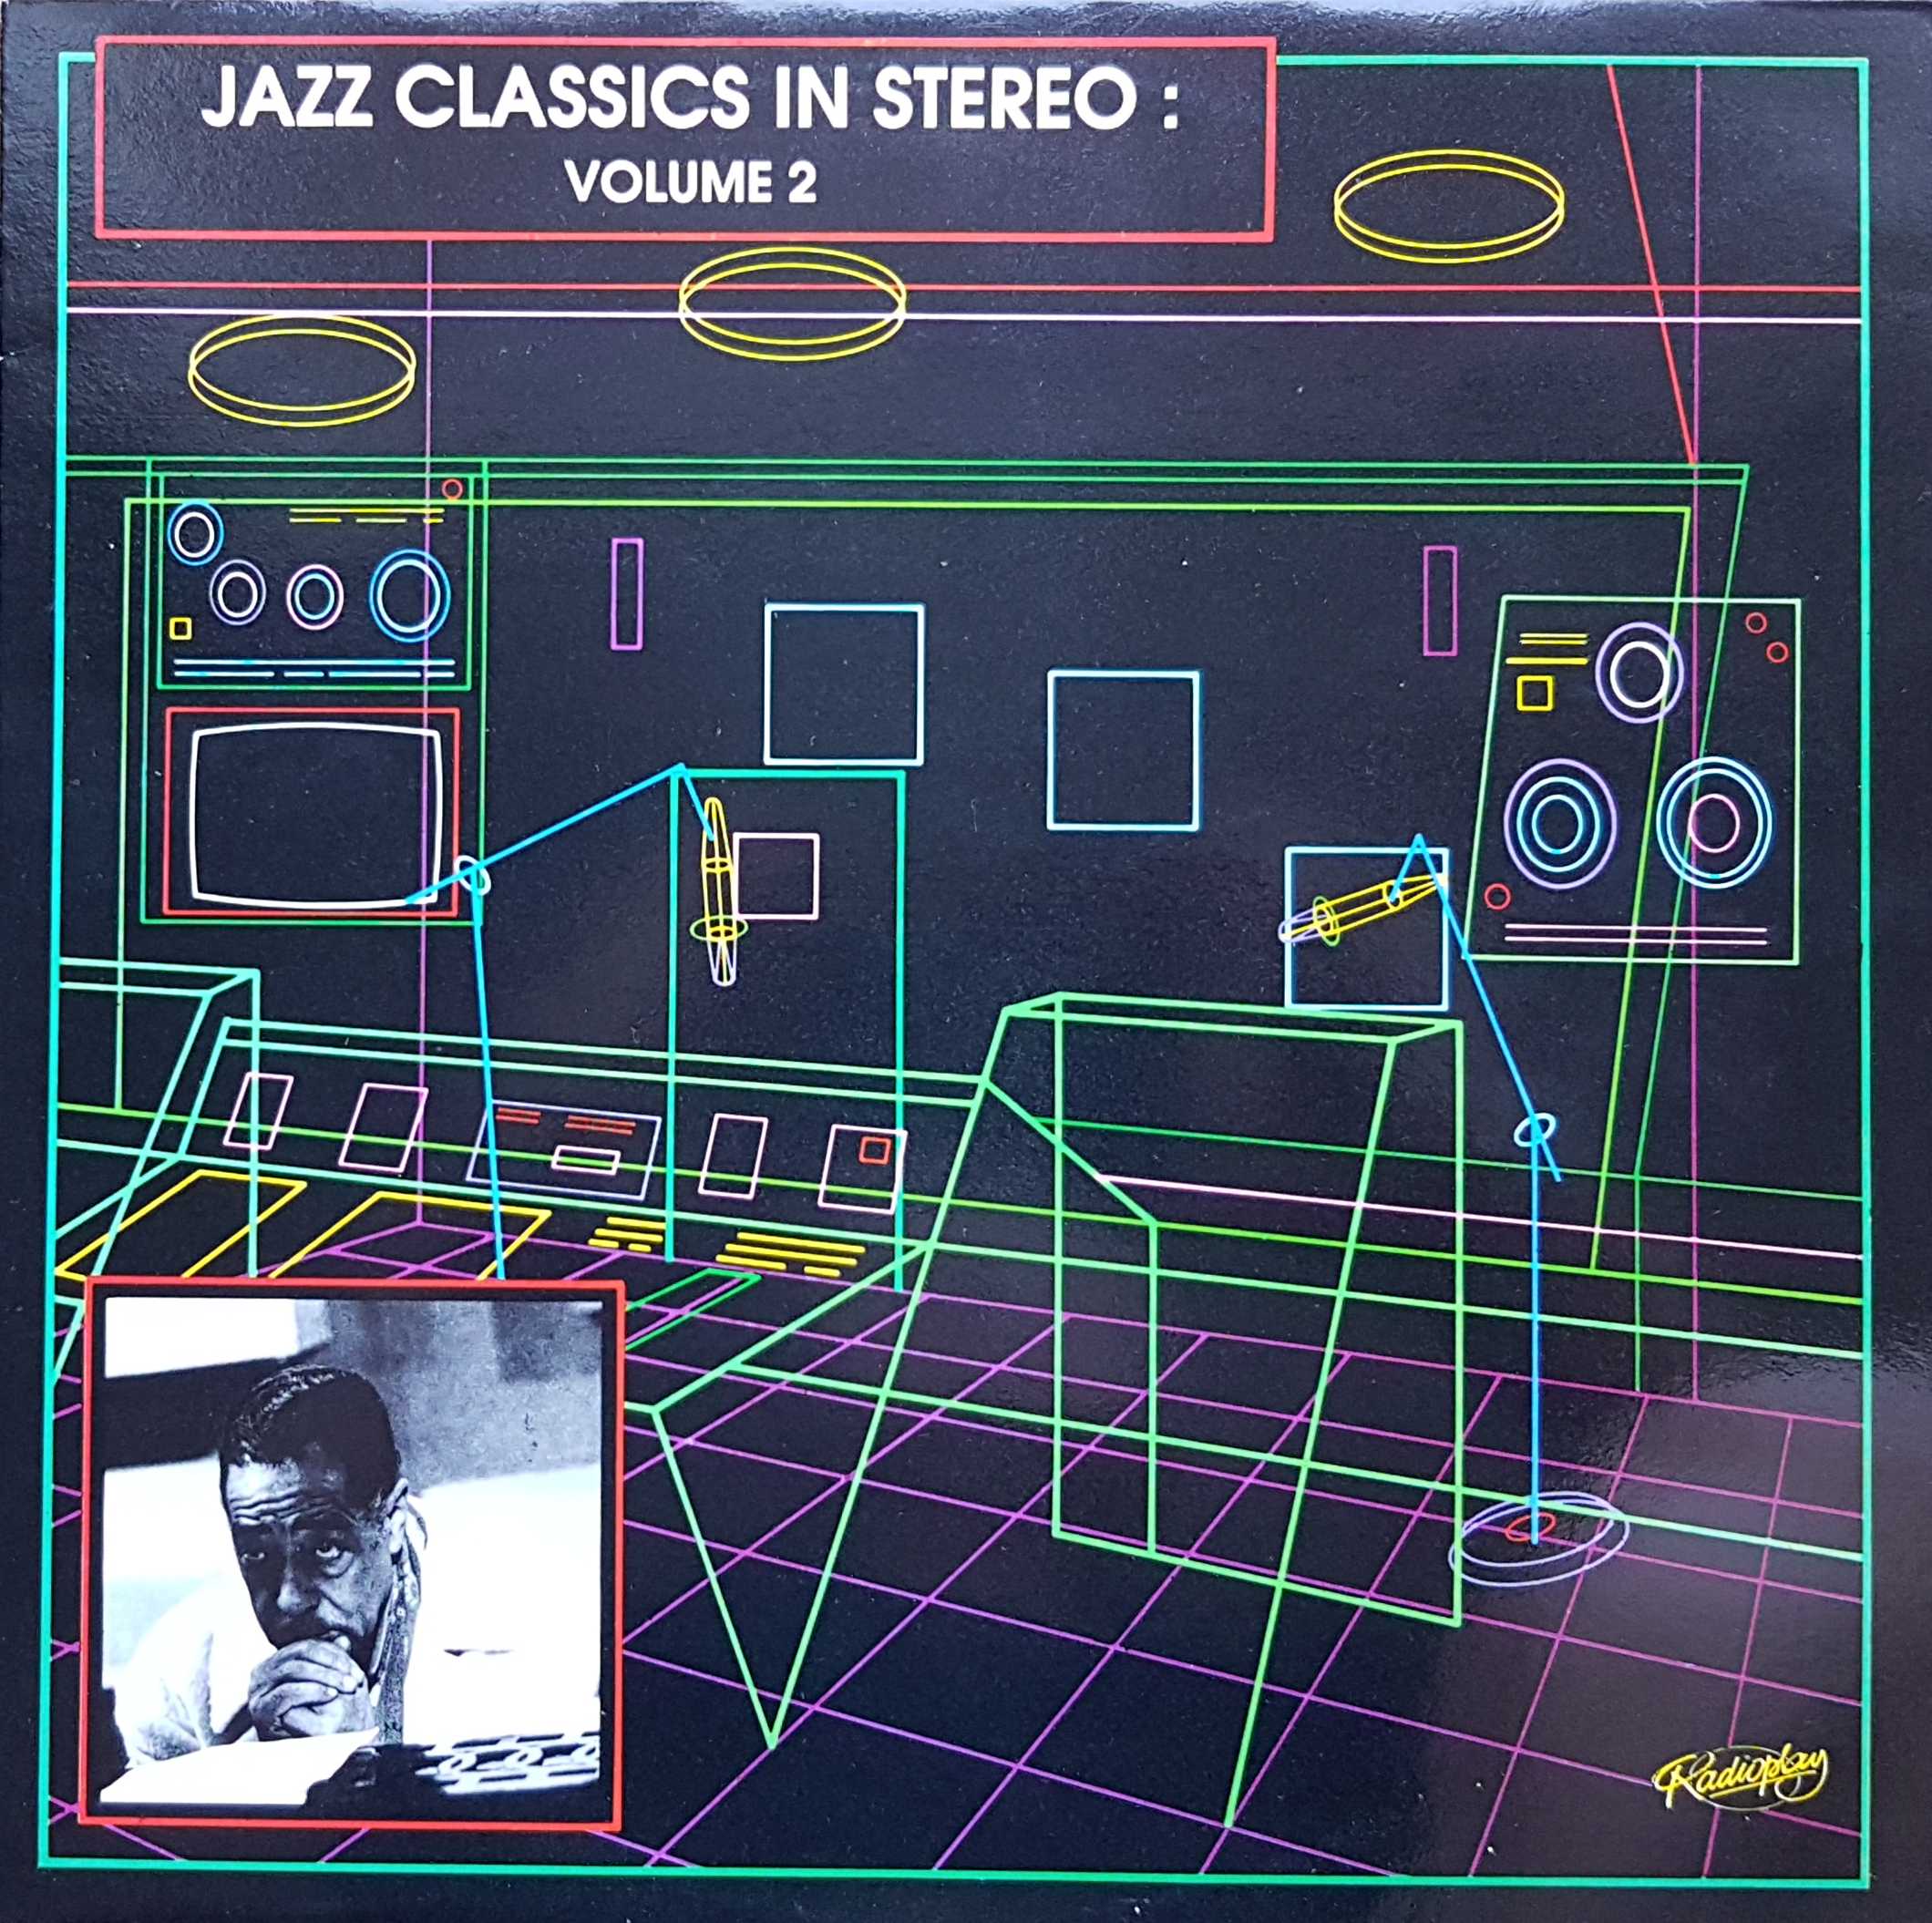 Picture of TAIR 87051 Jazz classics - Volume 2 by artist Various from the BBC albums - Records and Tapes library